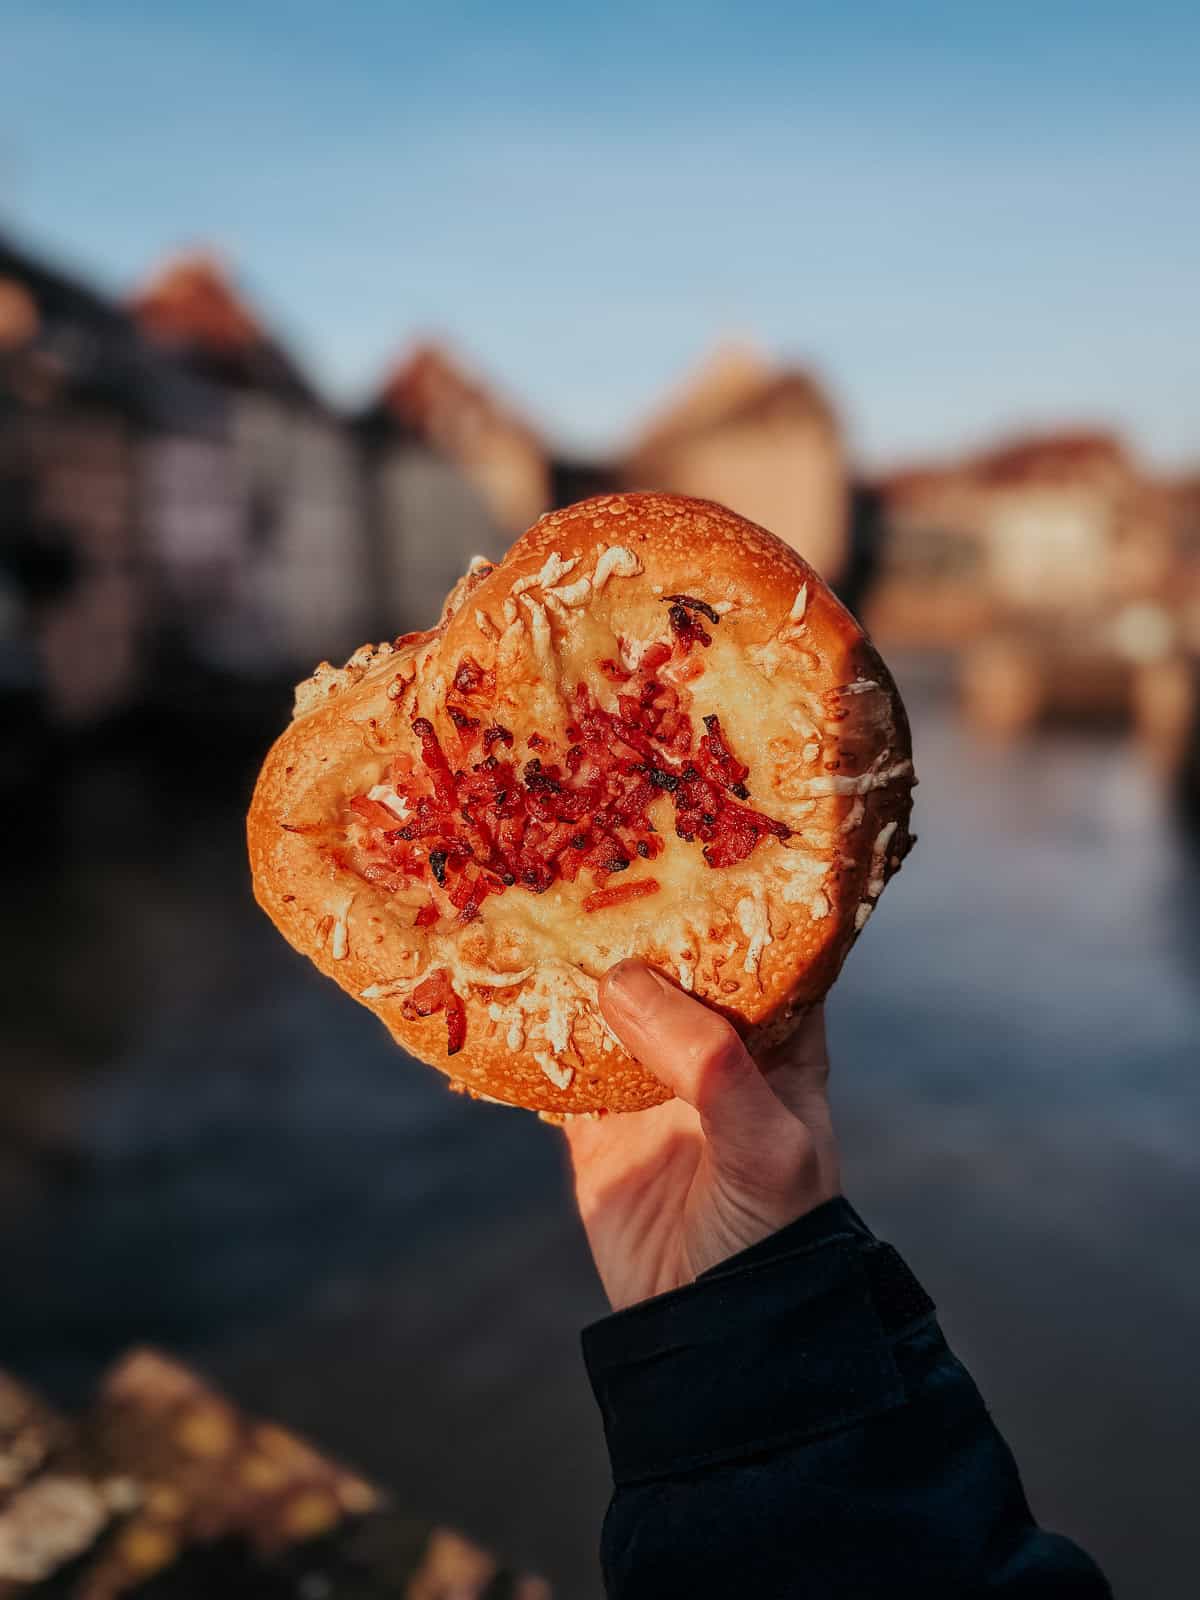 A person holding up a pretzel topped with melted cheese and red pepper strips against an old town backdrop, showcasing a creative street food snack